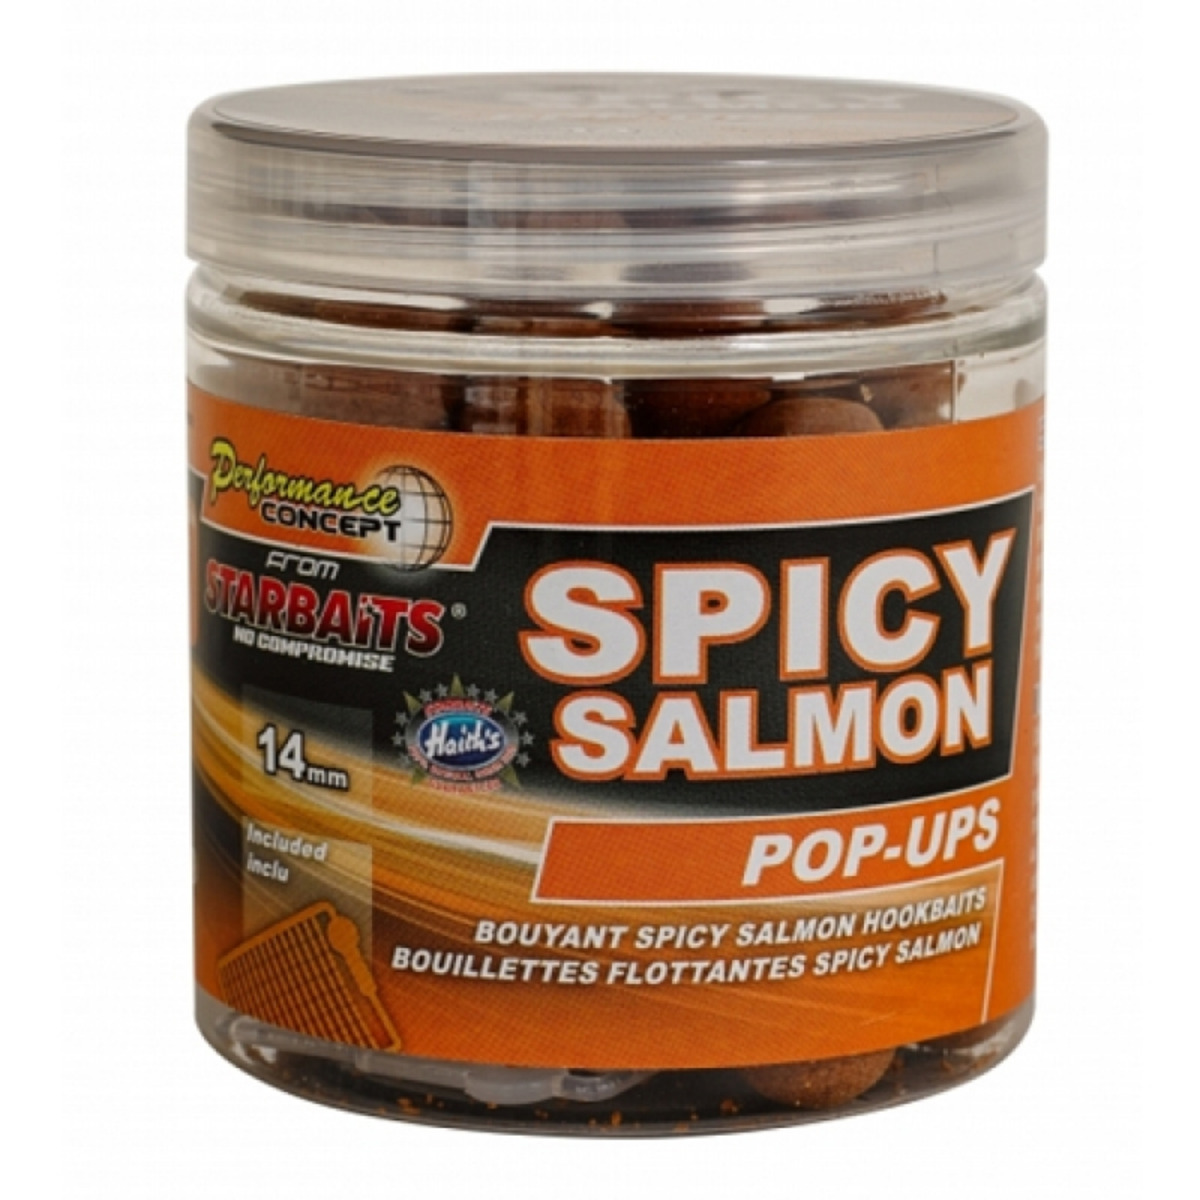 Starbaits Concept Pop Ups Spicy Salmon - 14 mm  - 80 g